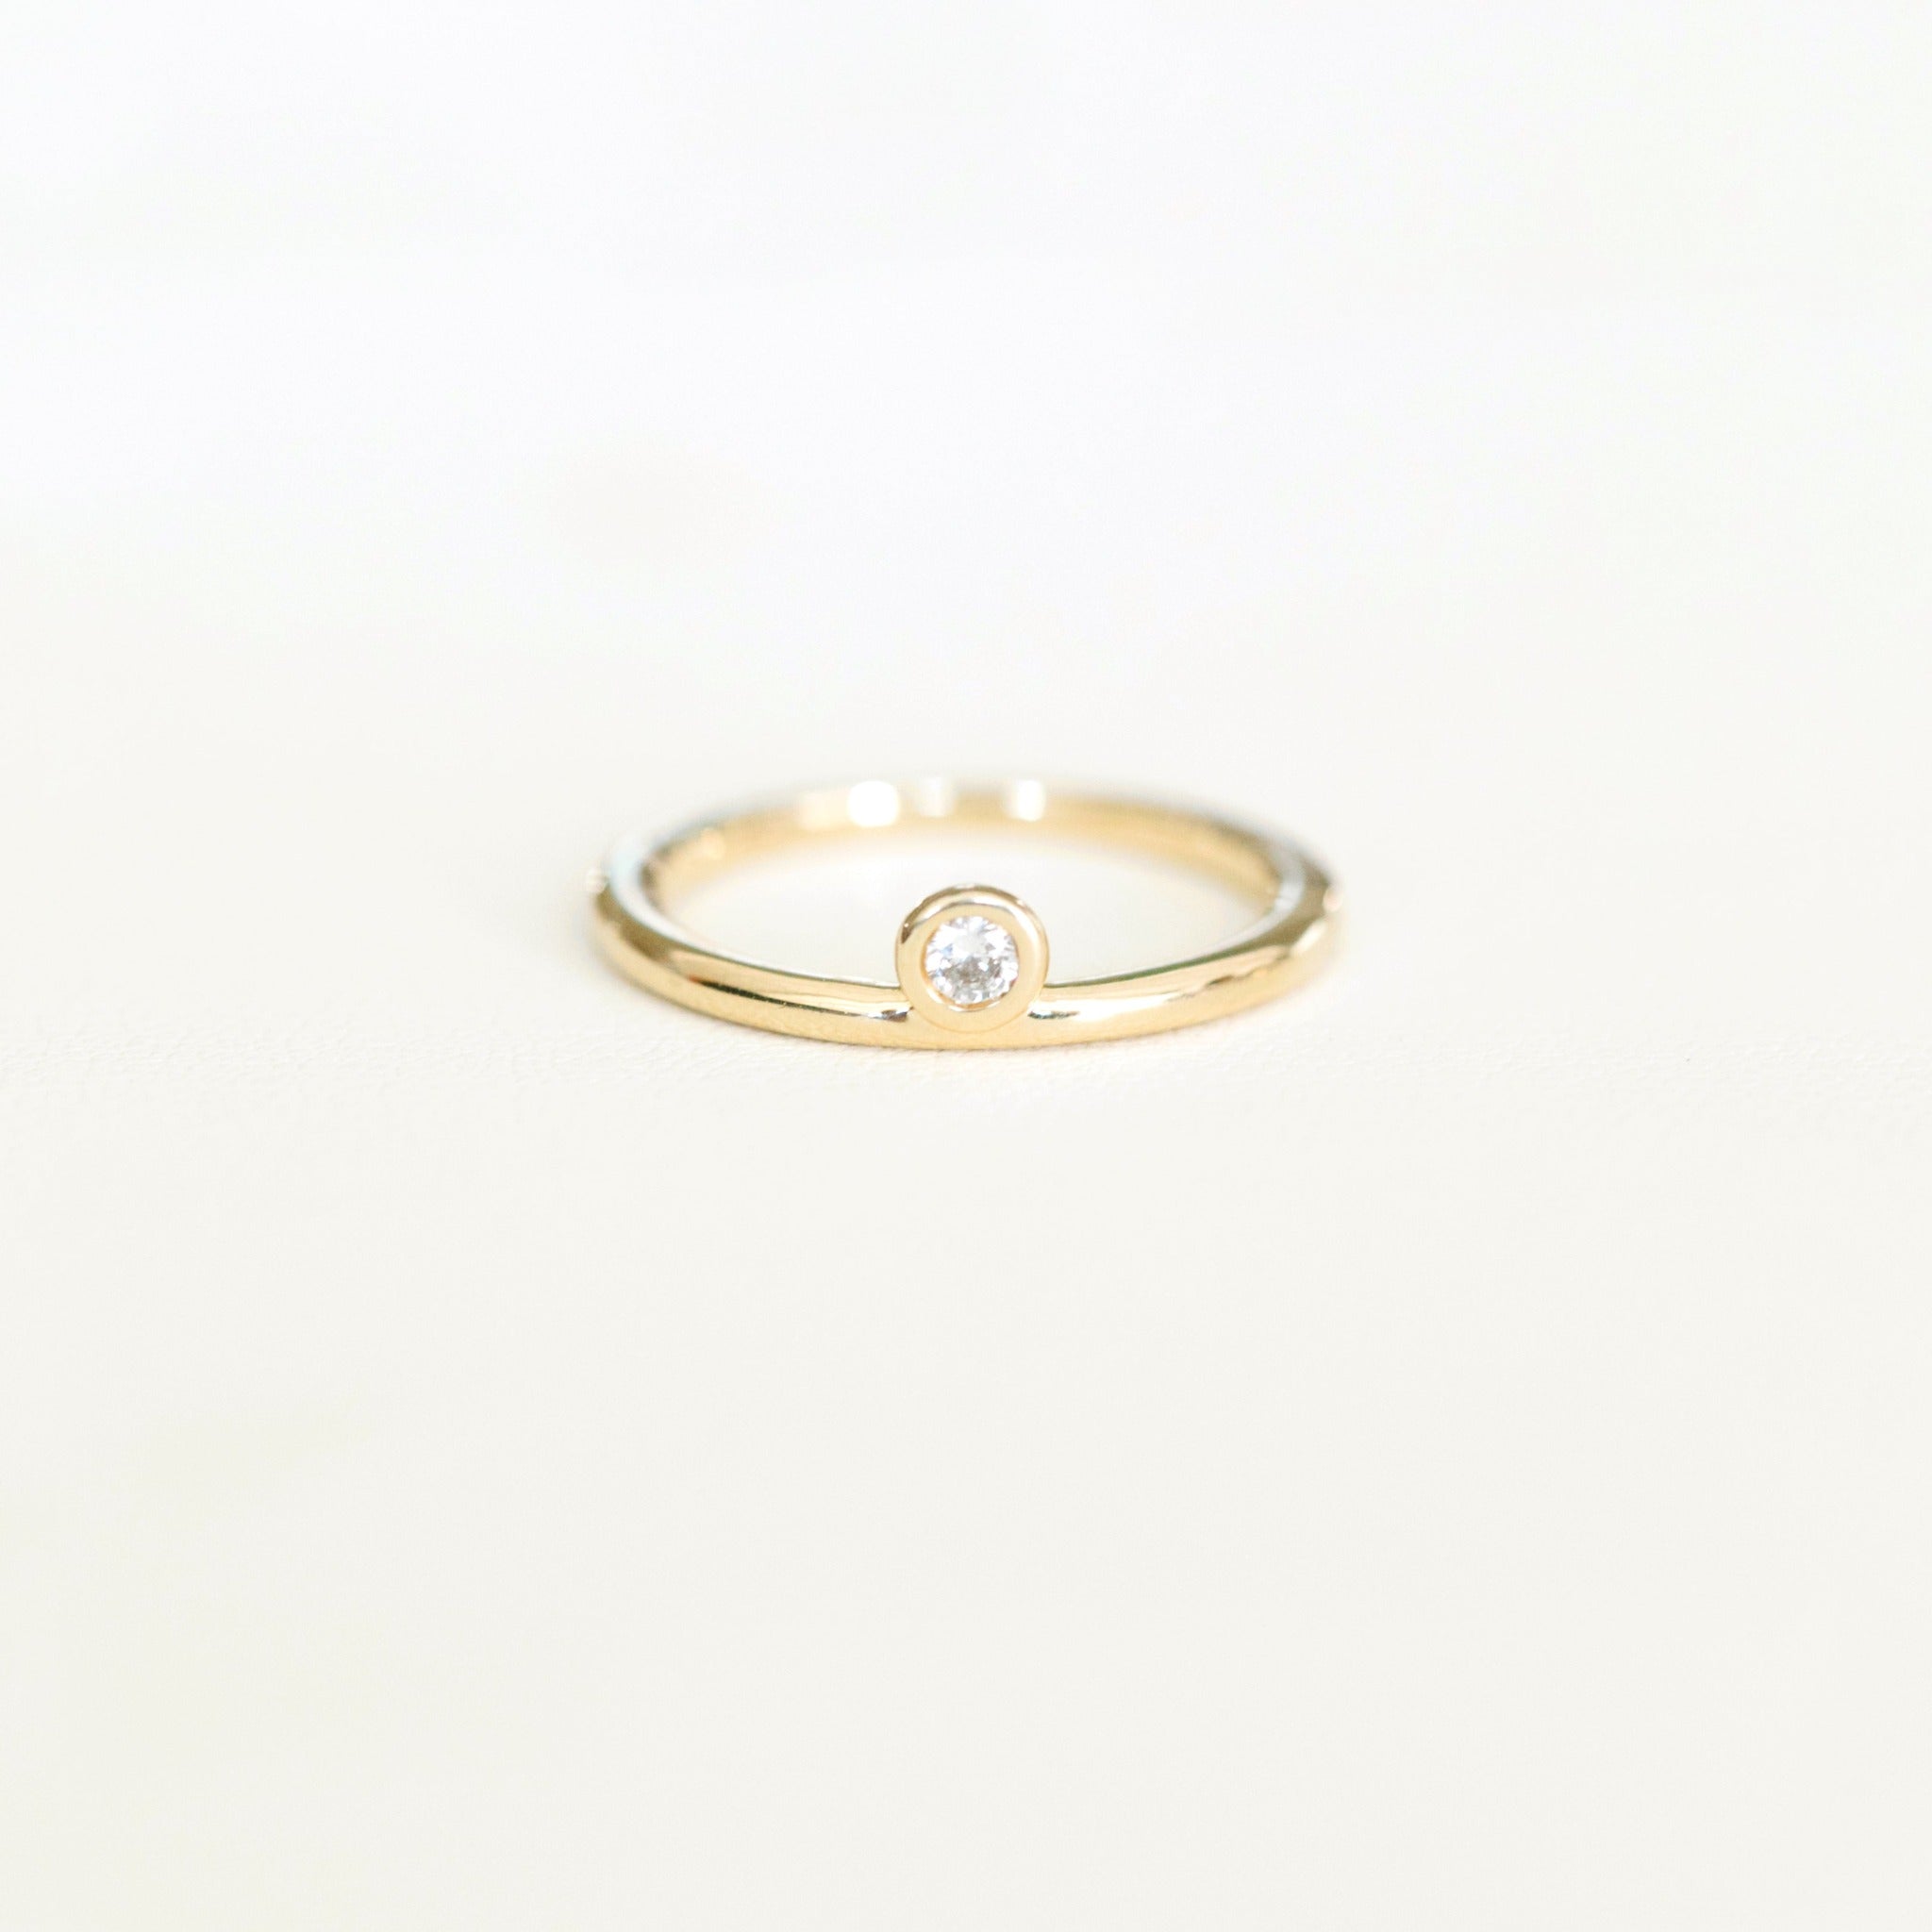 3mm diamond ring. The bezel set diamond is offset making it asymmetrical and unique. The diamond is brilliant cut.